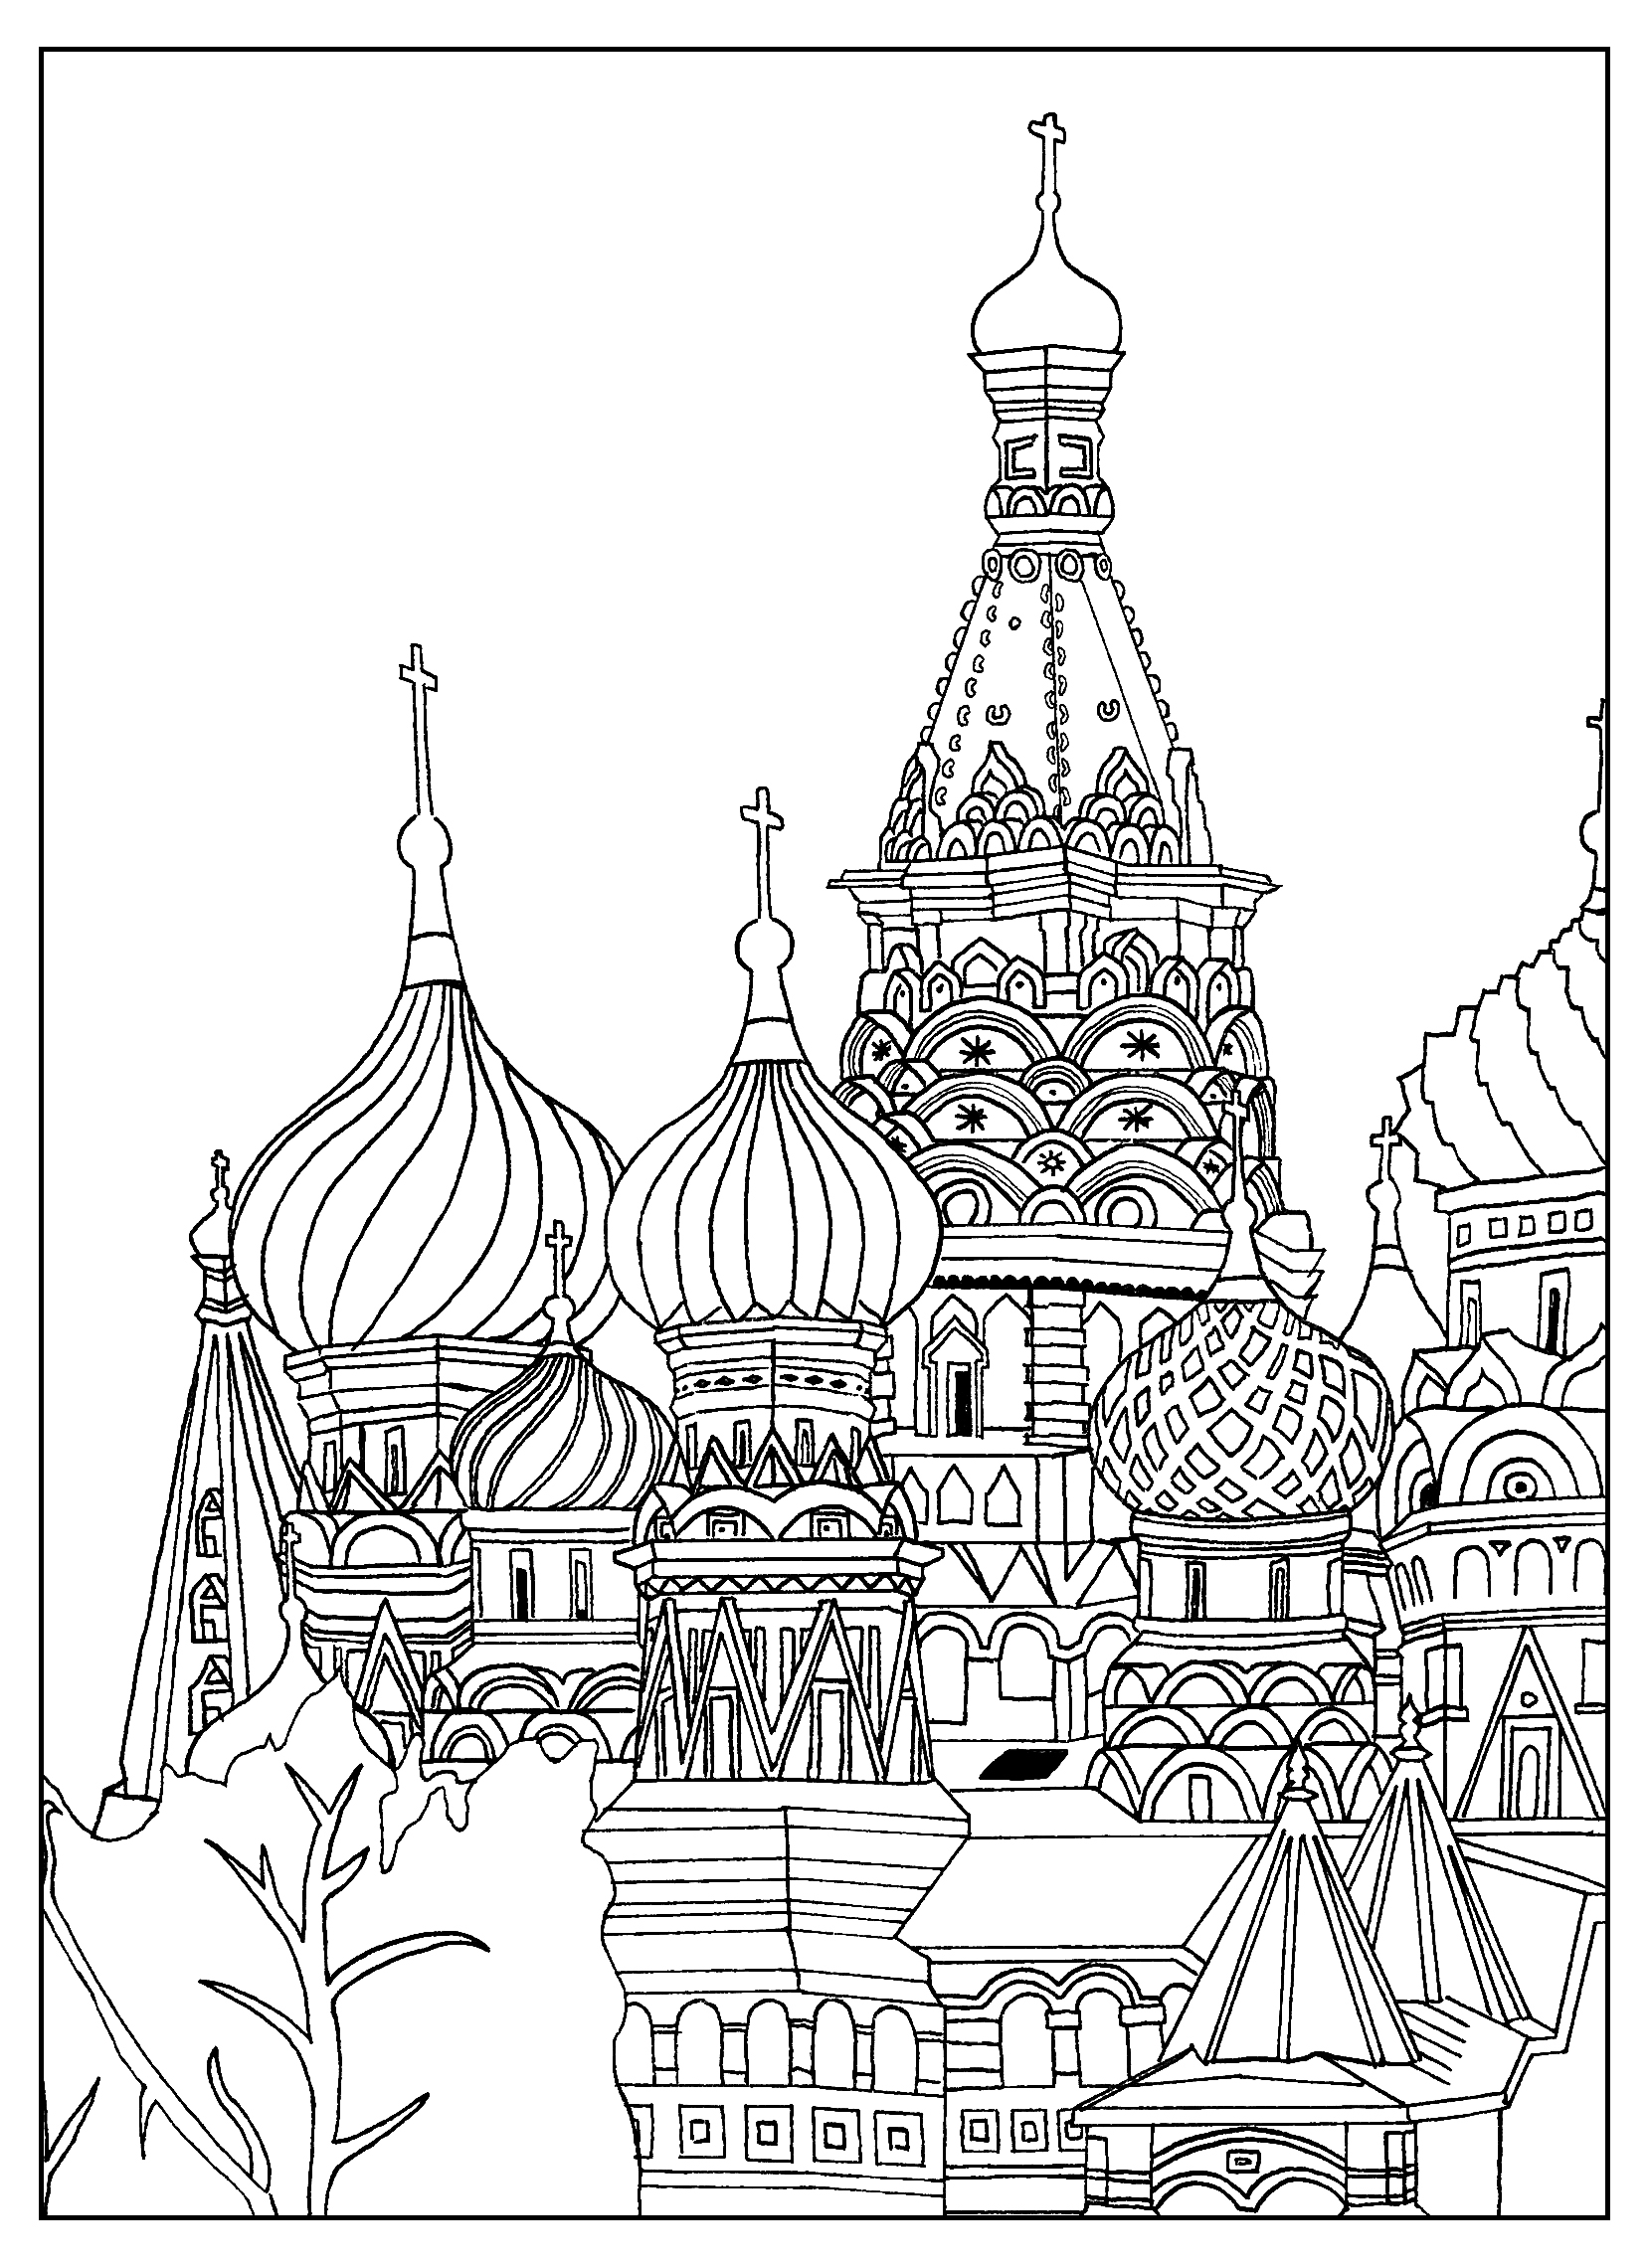 City Buildings Coloring Pages at GetDrawings | Free download